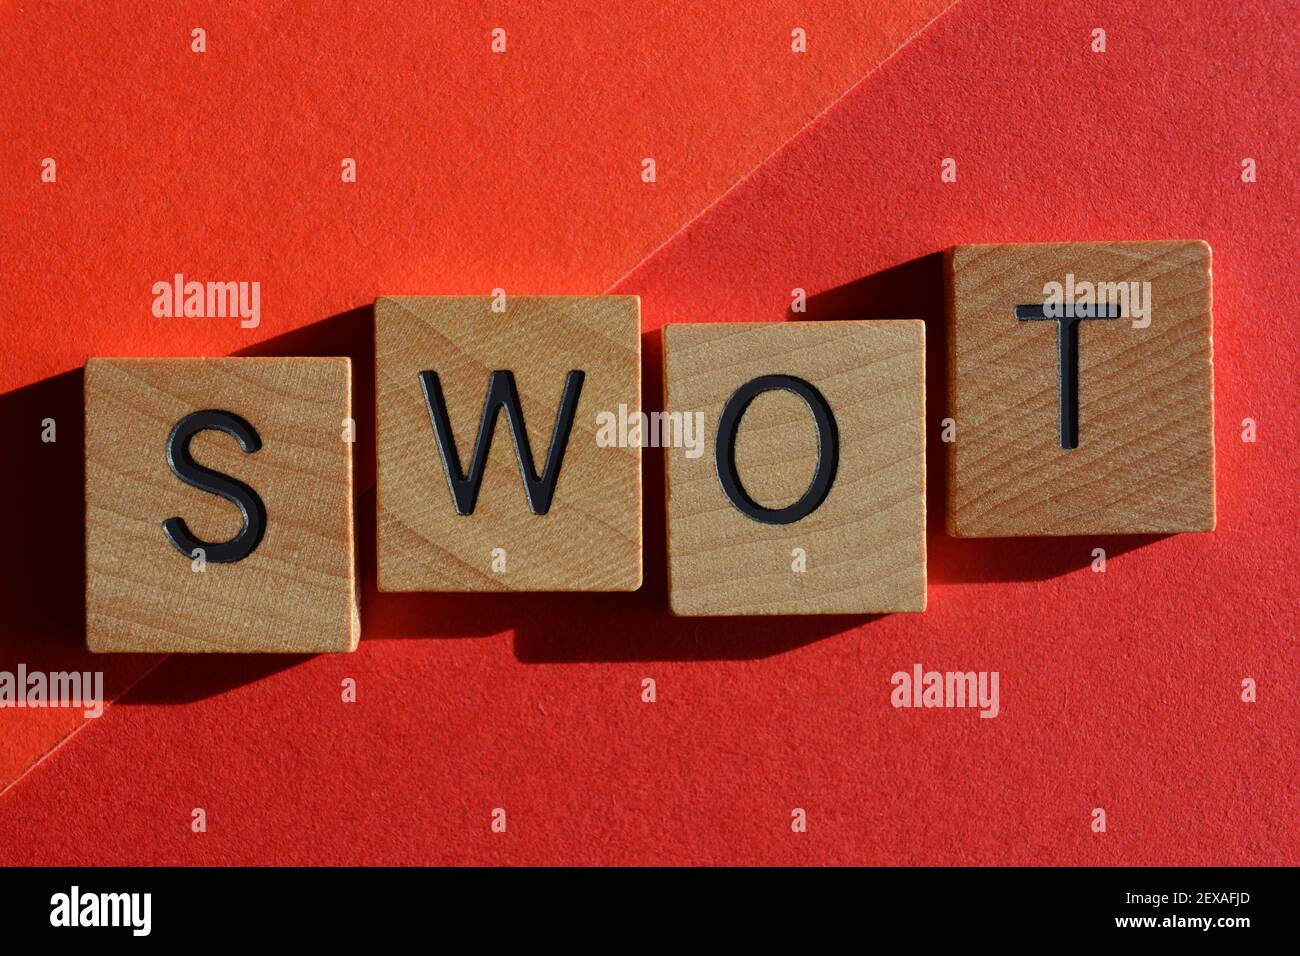 swot, business acronym for Strengths, Weaknesses, Opportunities, Threats, Stock Photo